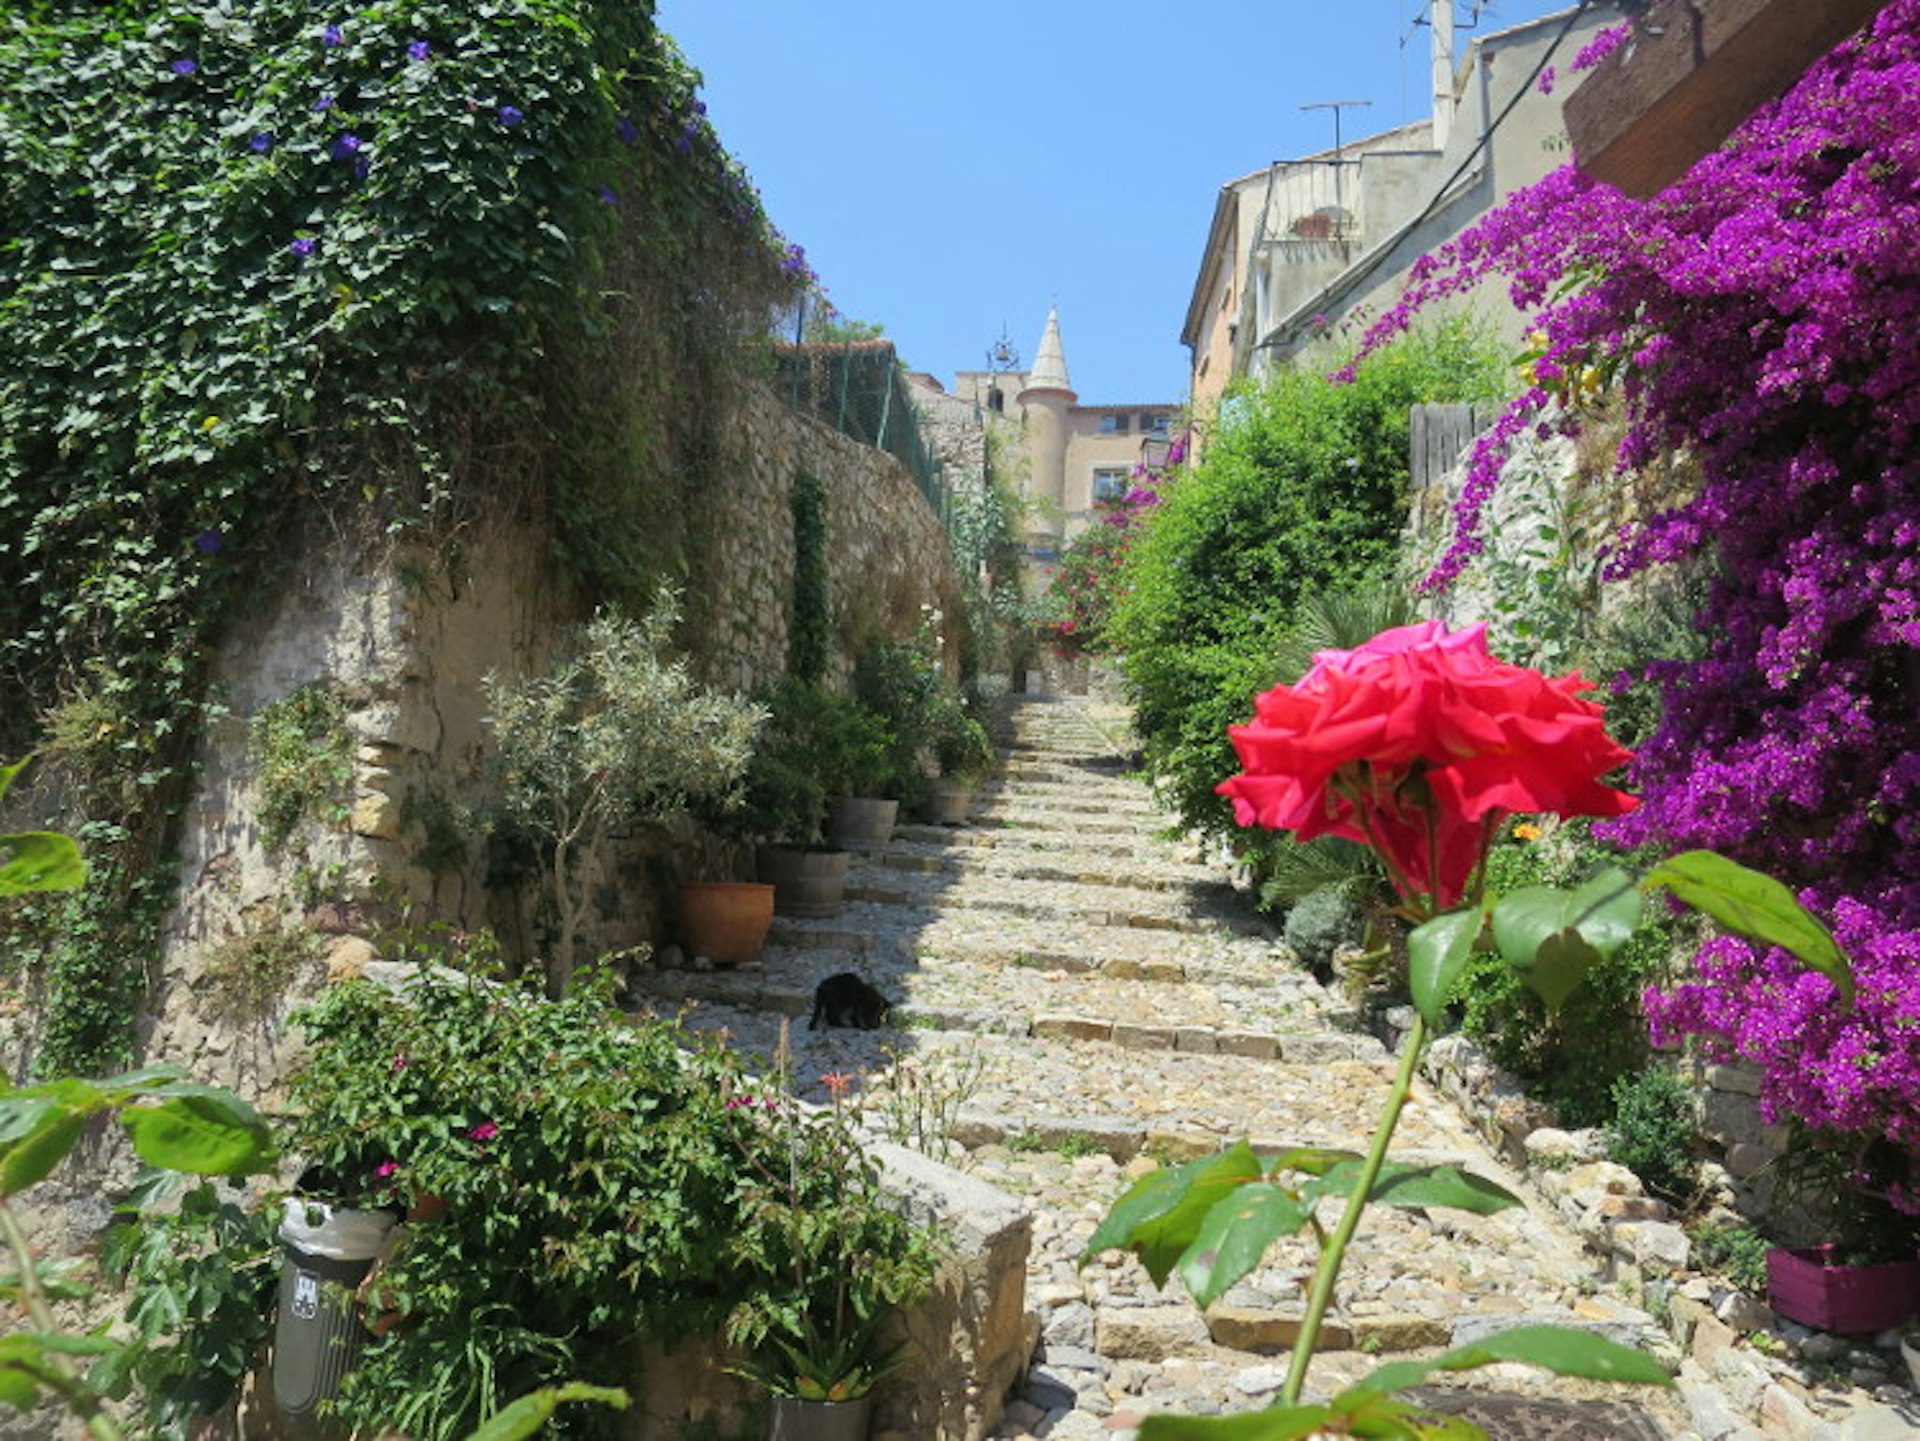 The charming Rue du Repos, Hyères’ Old Town. Image by Karyn Noble/Lonely Planet 